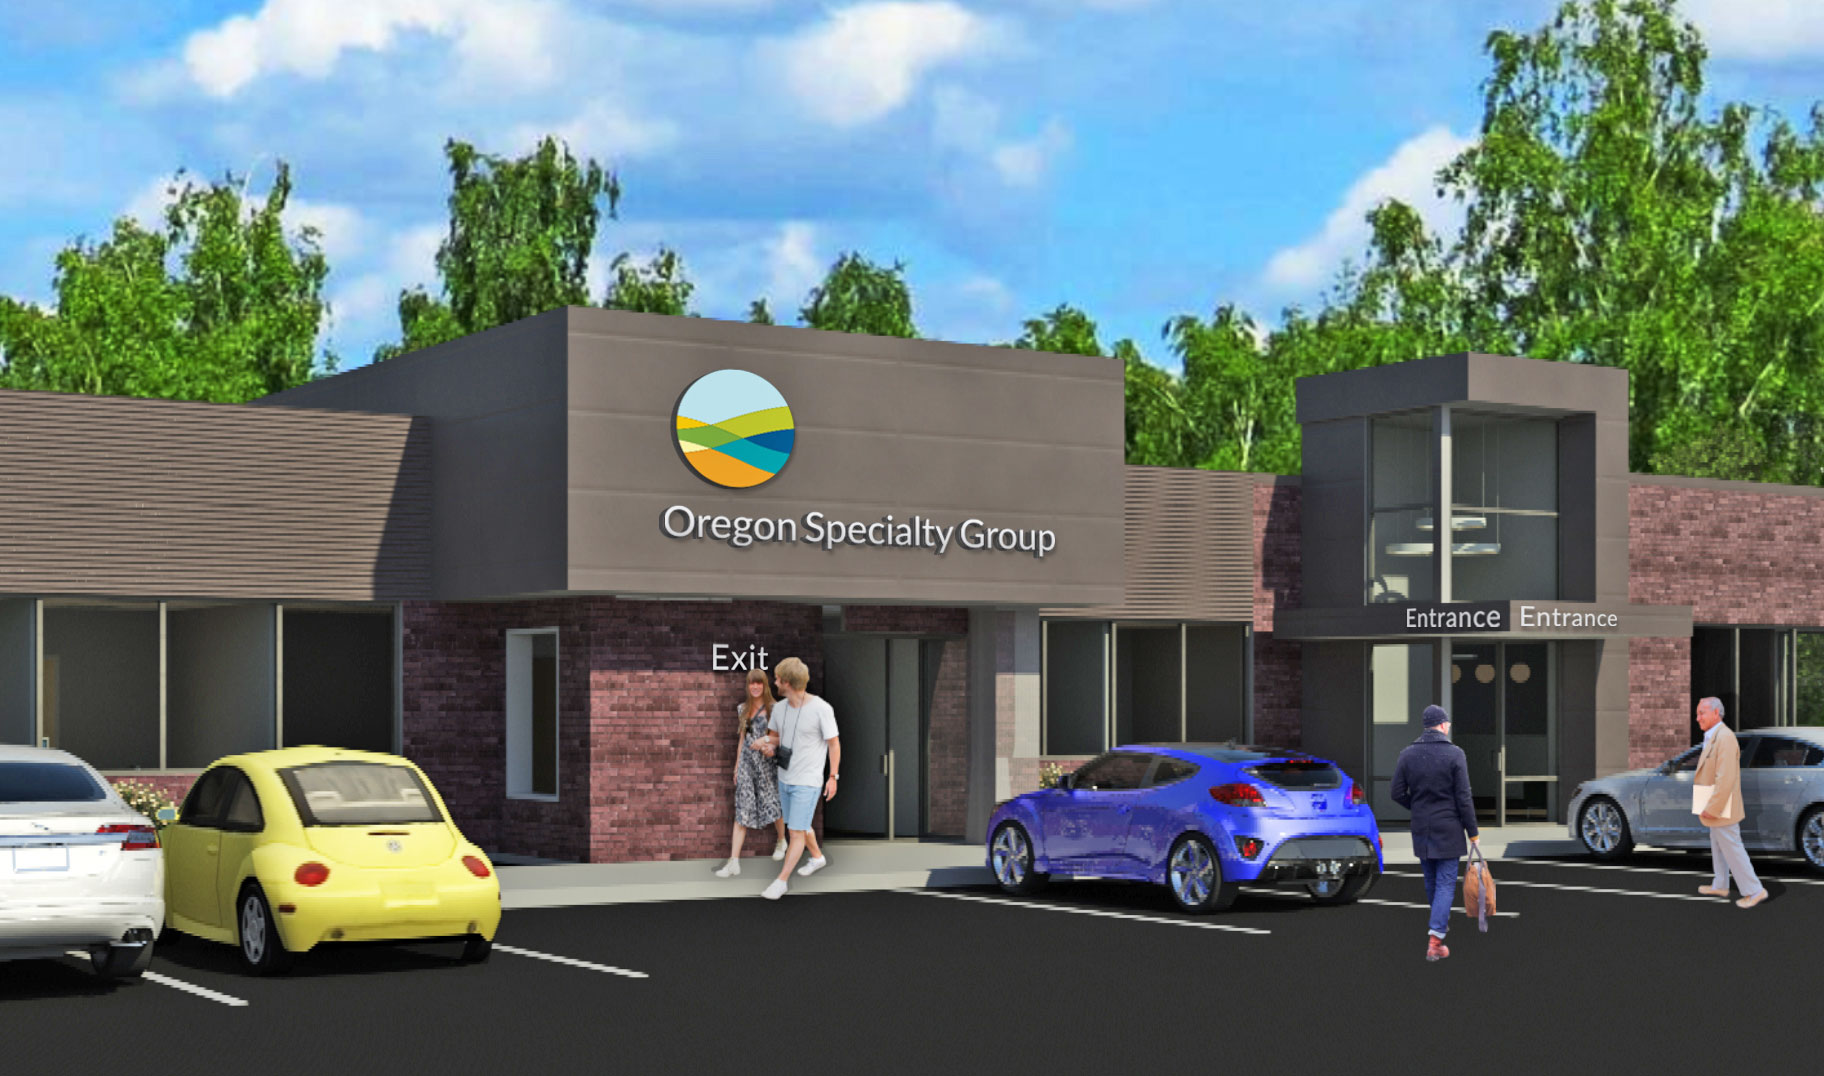 Architect's rendering of the exterior of the new Oregon Specialty Group building on Ryan Drive in Salem, Oregon.